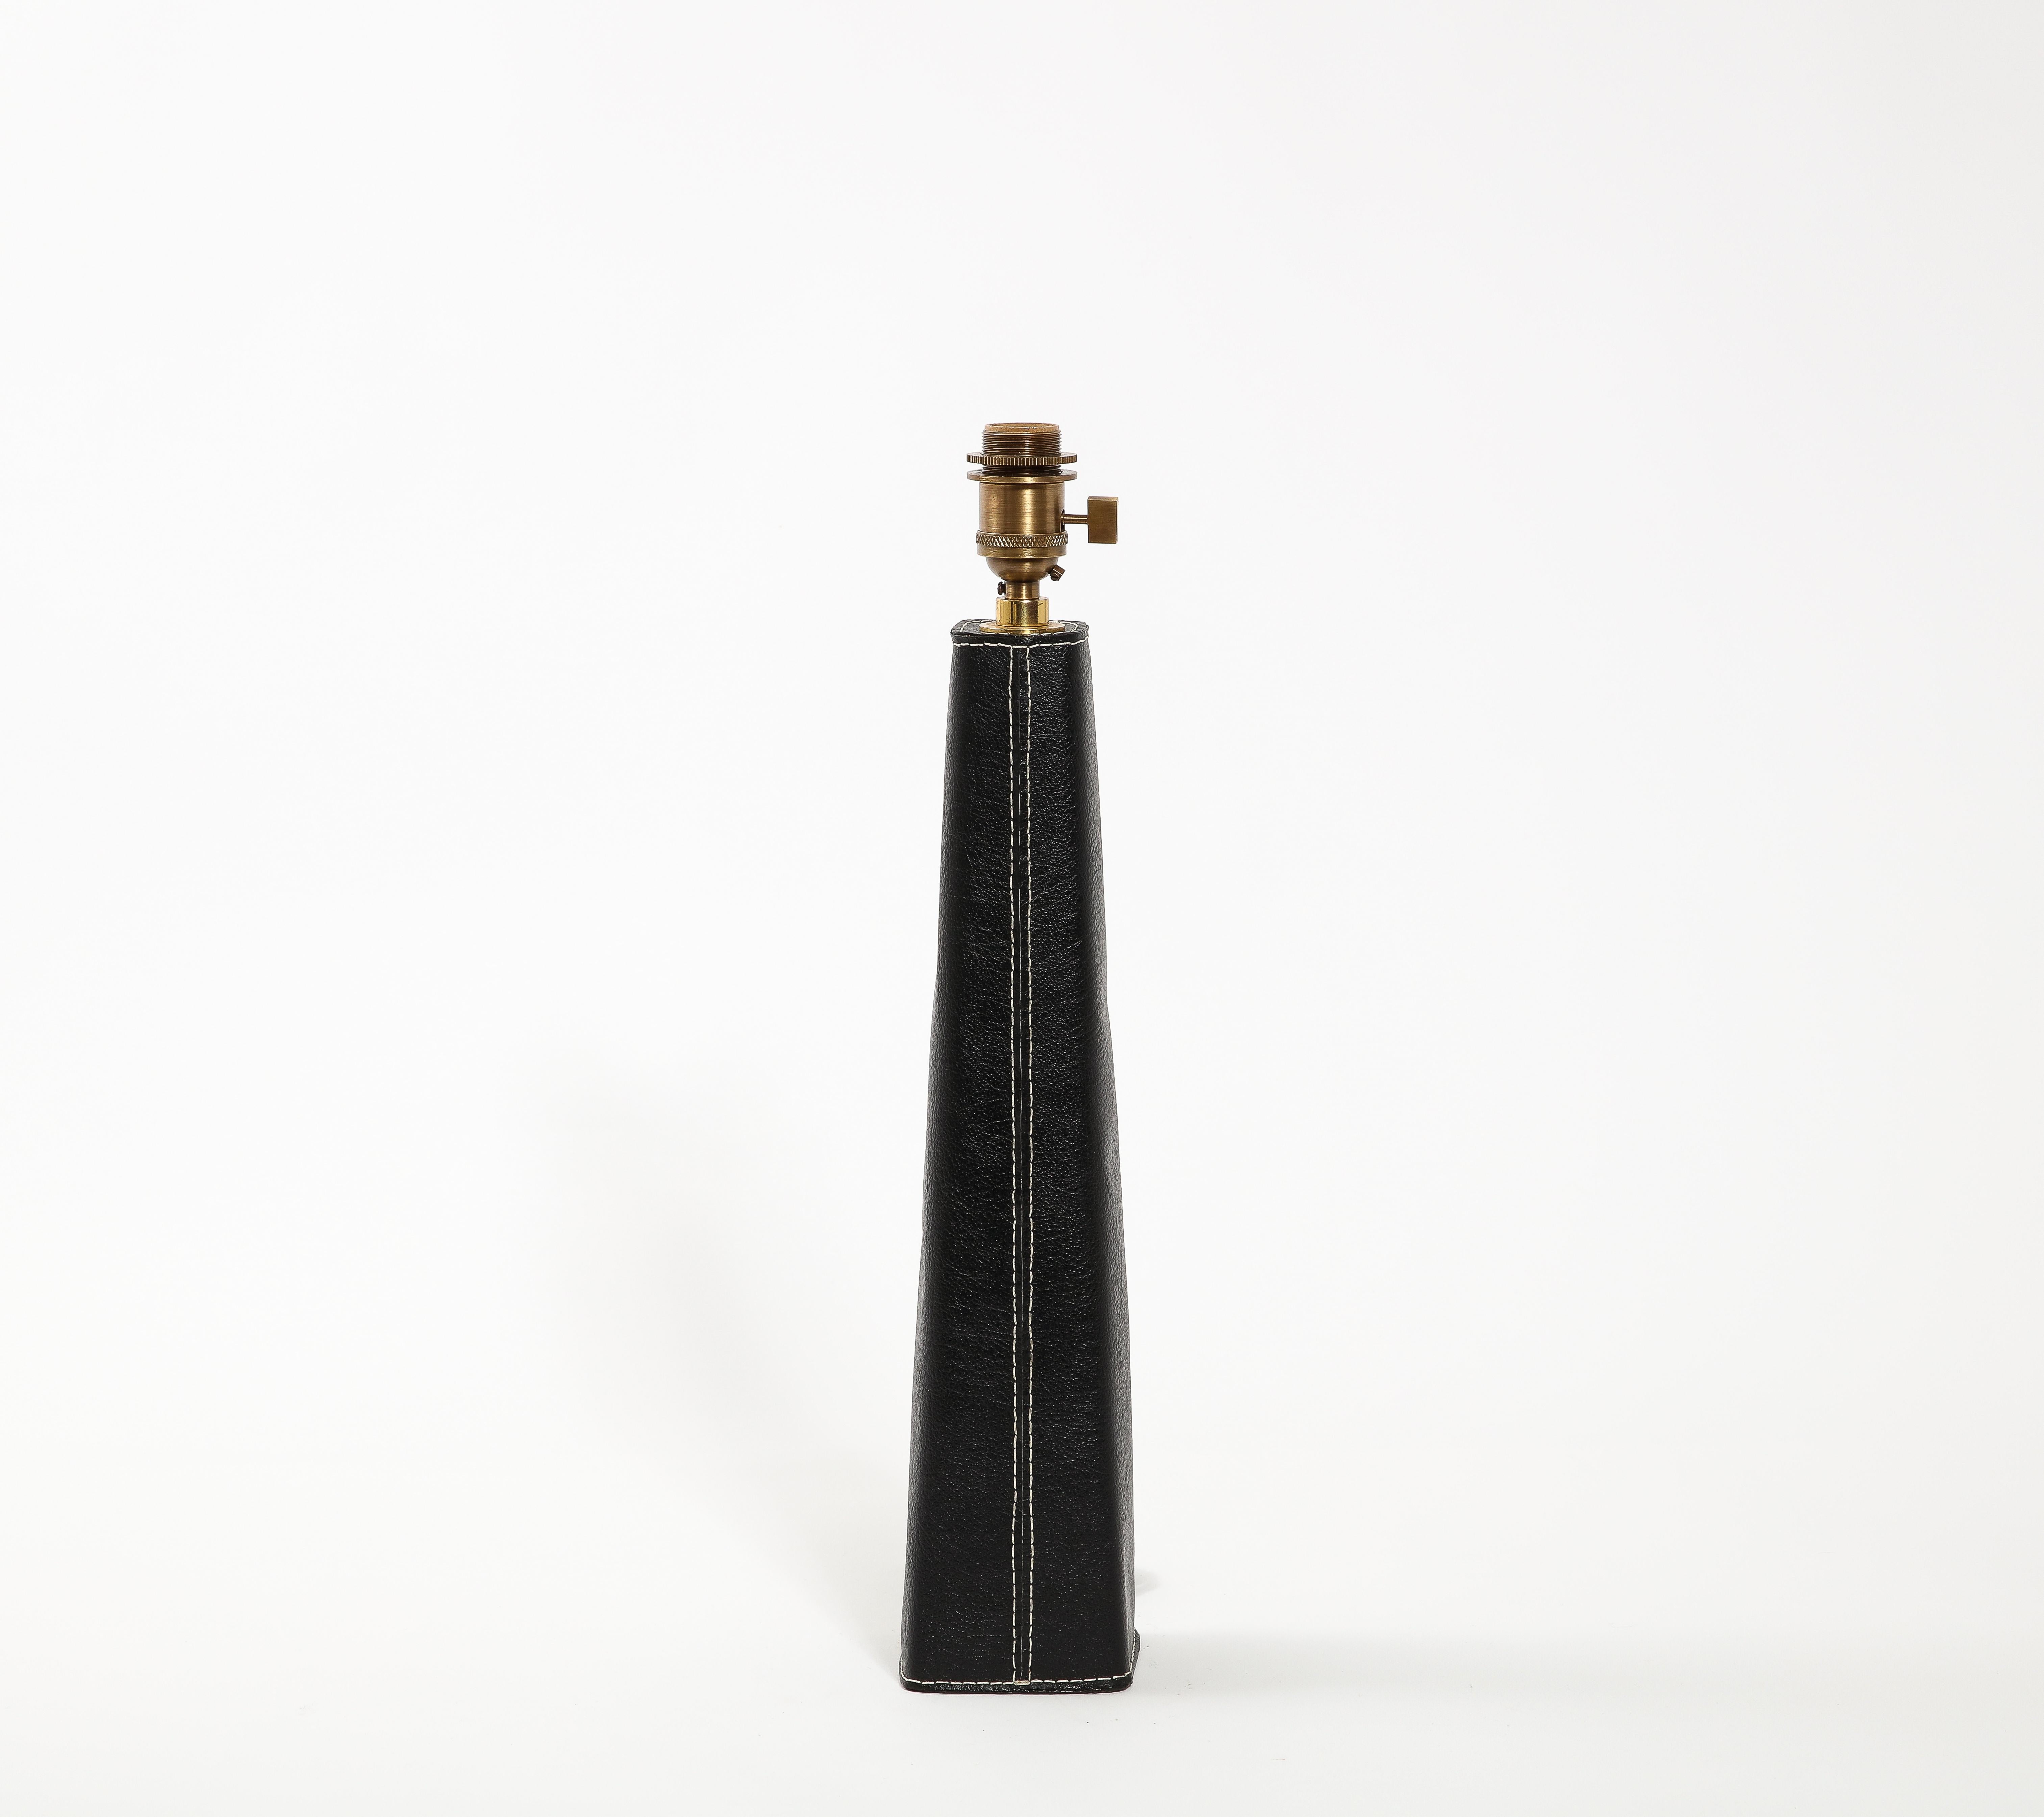 Tall obelisk-shaped lamp by Metalarte of Spain, covered in leather and stitched along the base and stem. Signed underneath. Size is of the base only. No shade included.